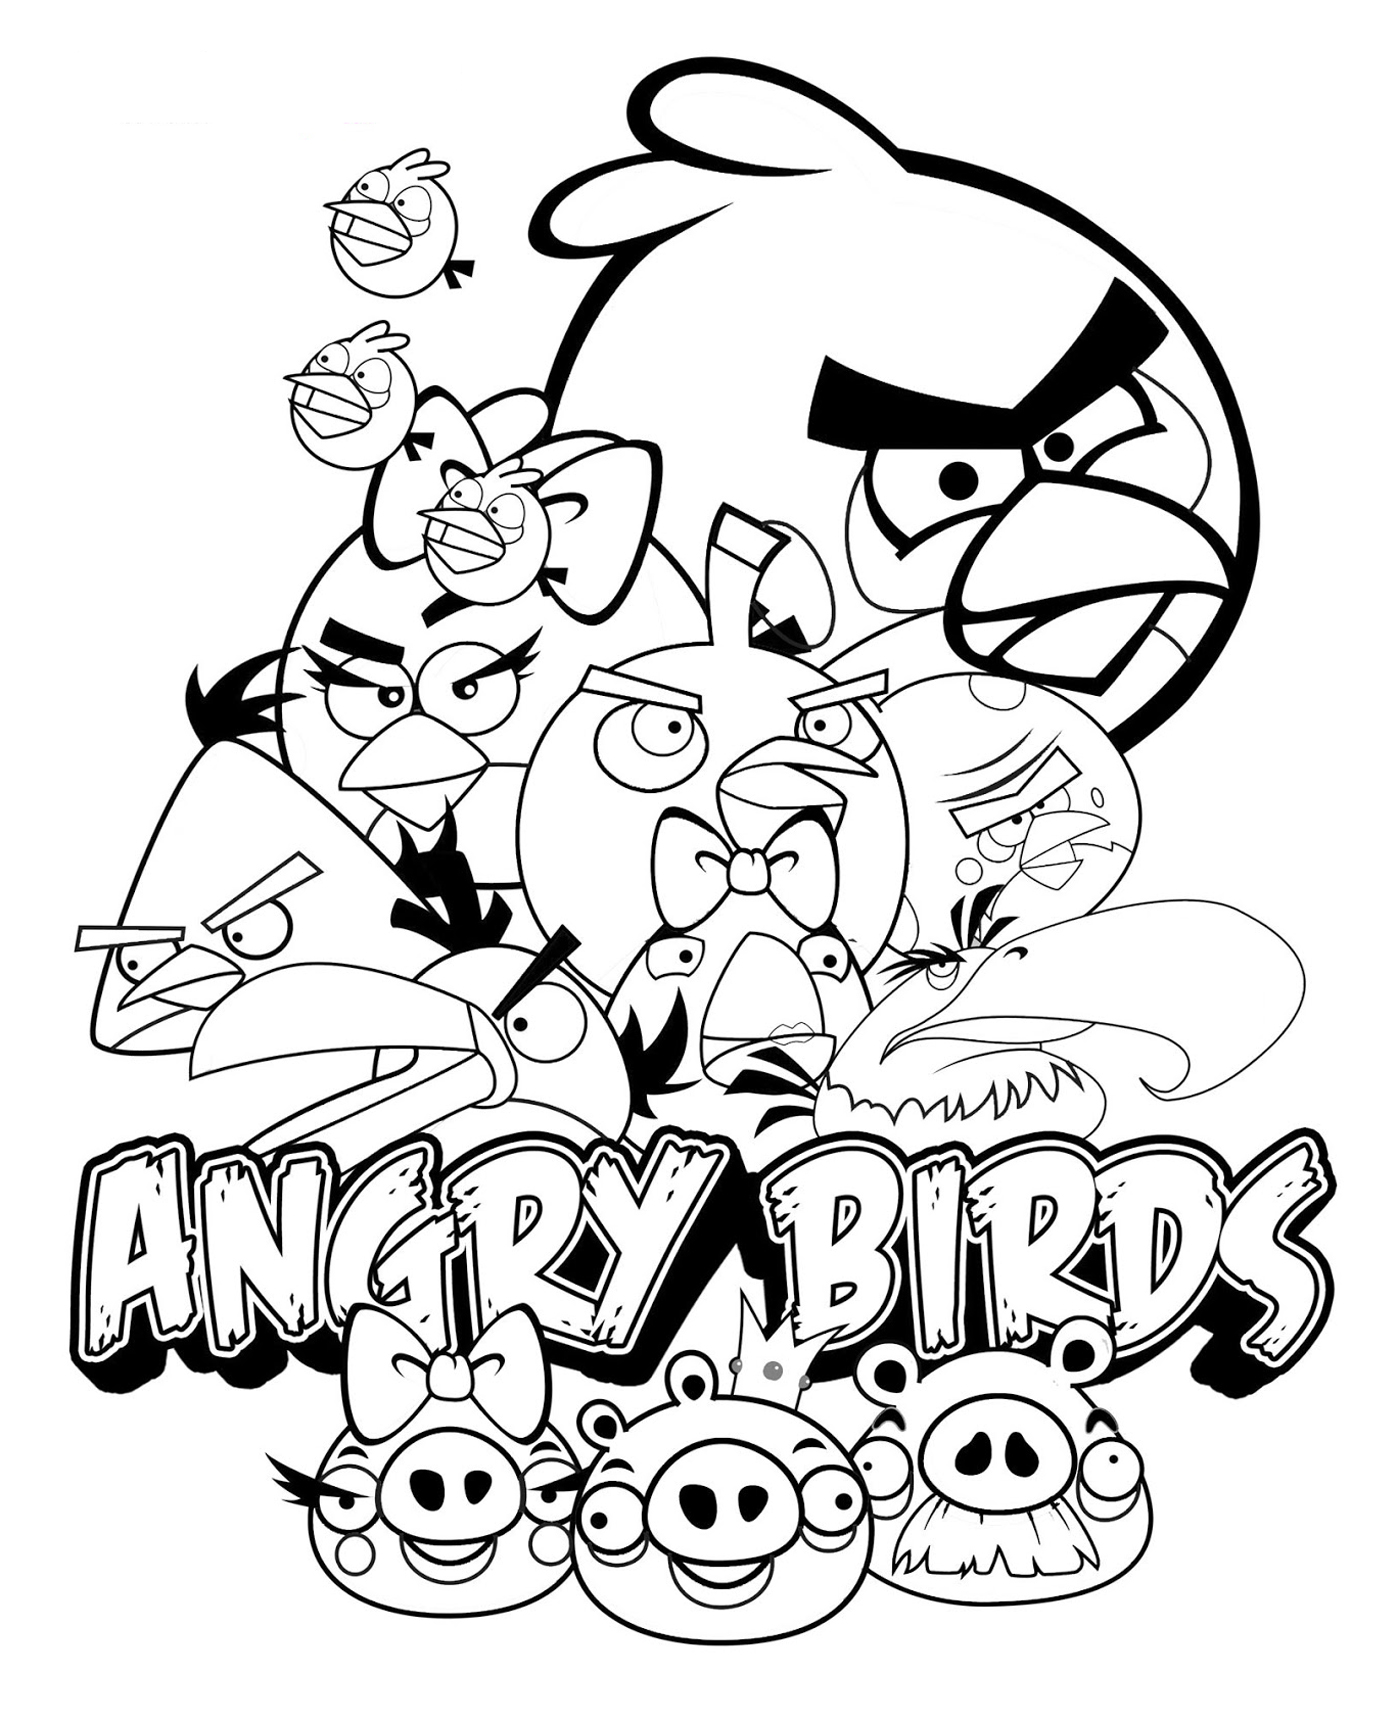 Free Printable Angry Birds Coloring Pages